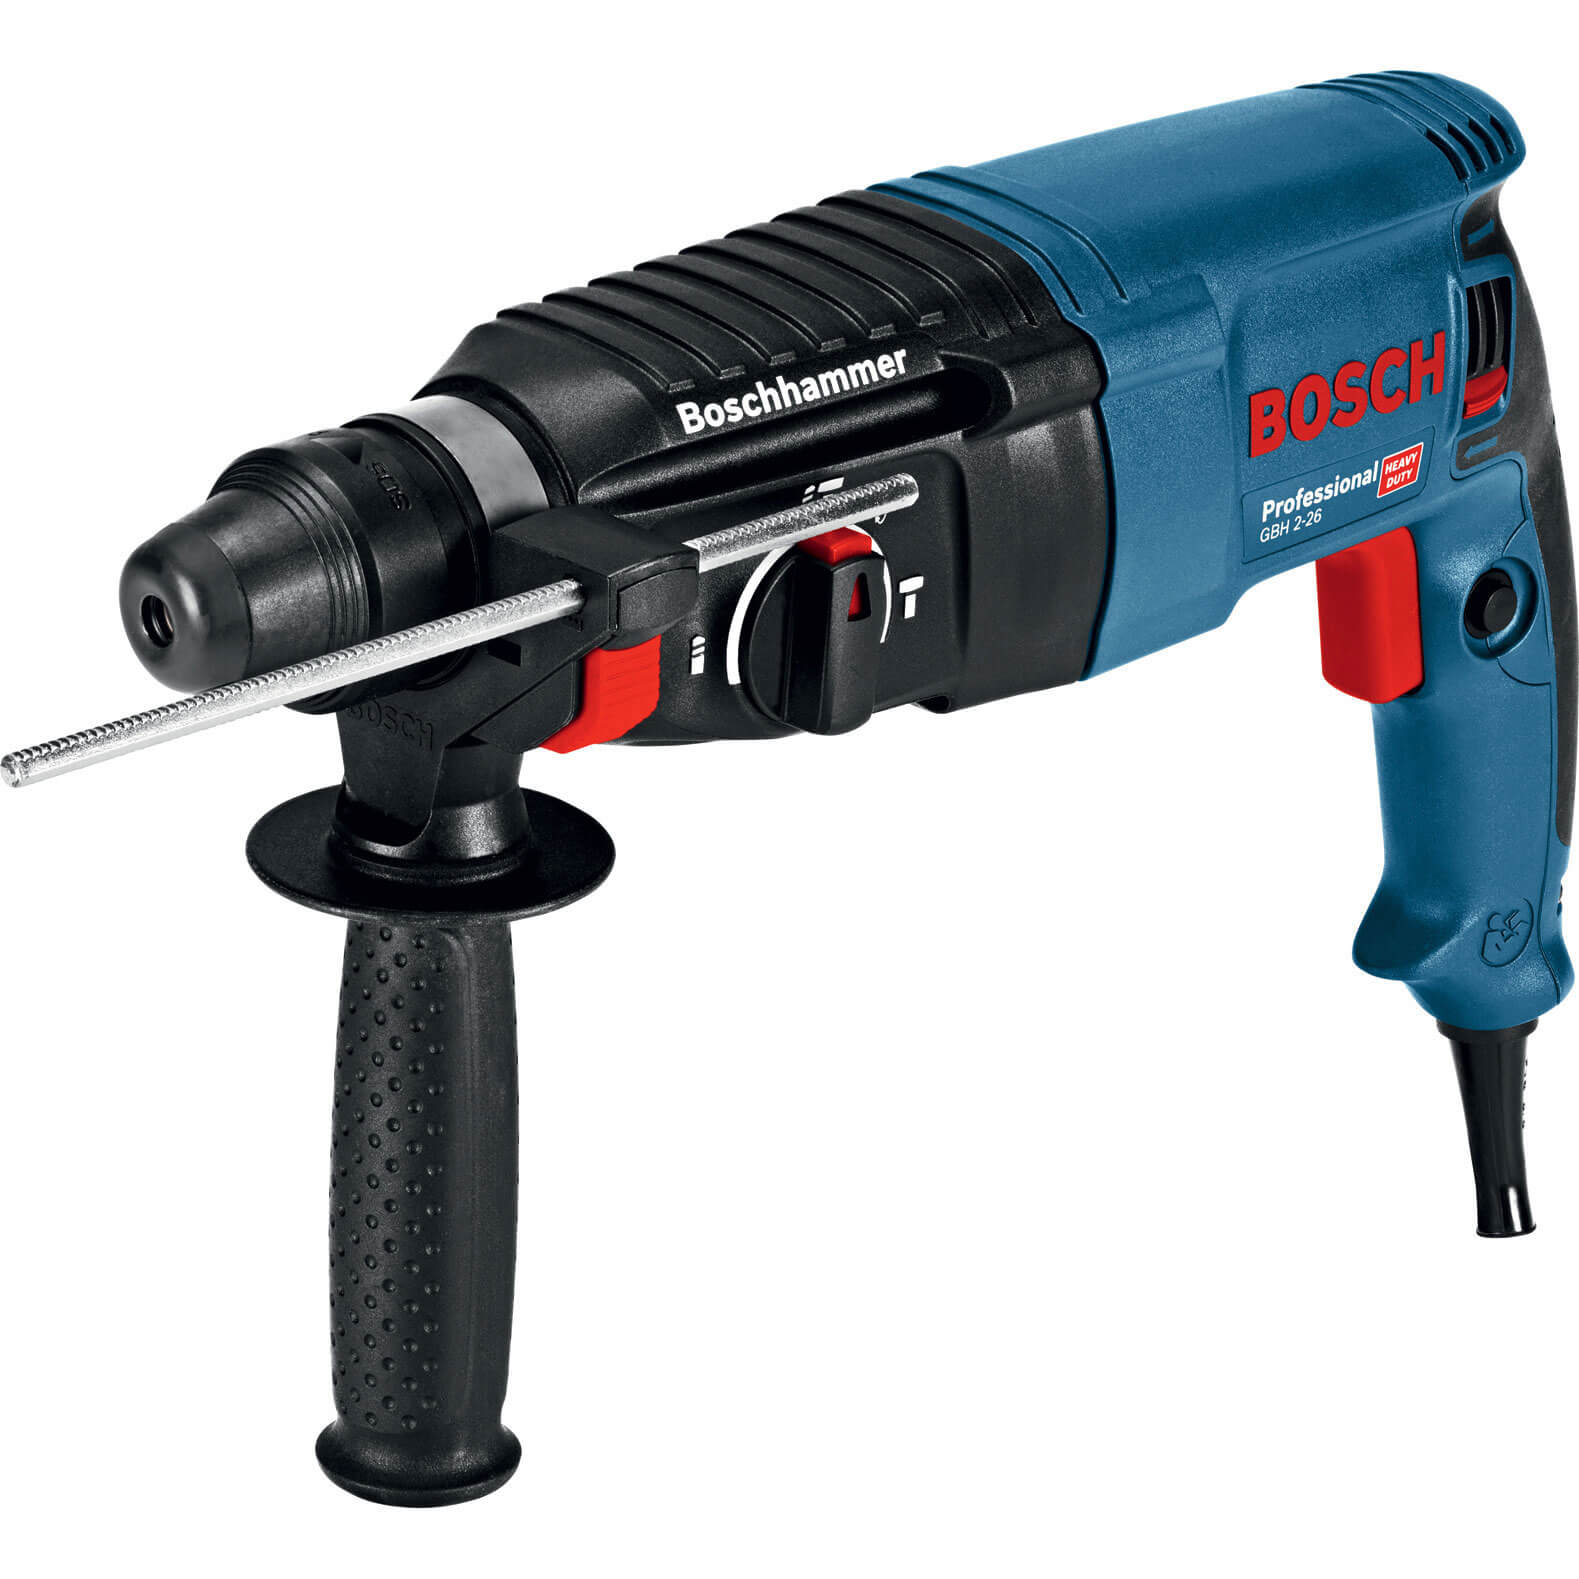 Photo of Bosch Gbh 2 26 Sds Plus 3 Mode Rotary Hammer Drill 110v